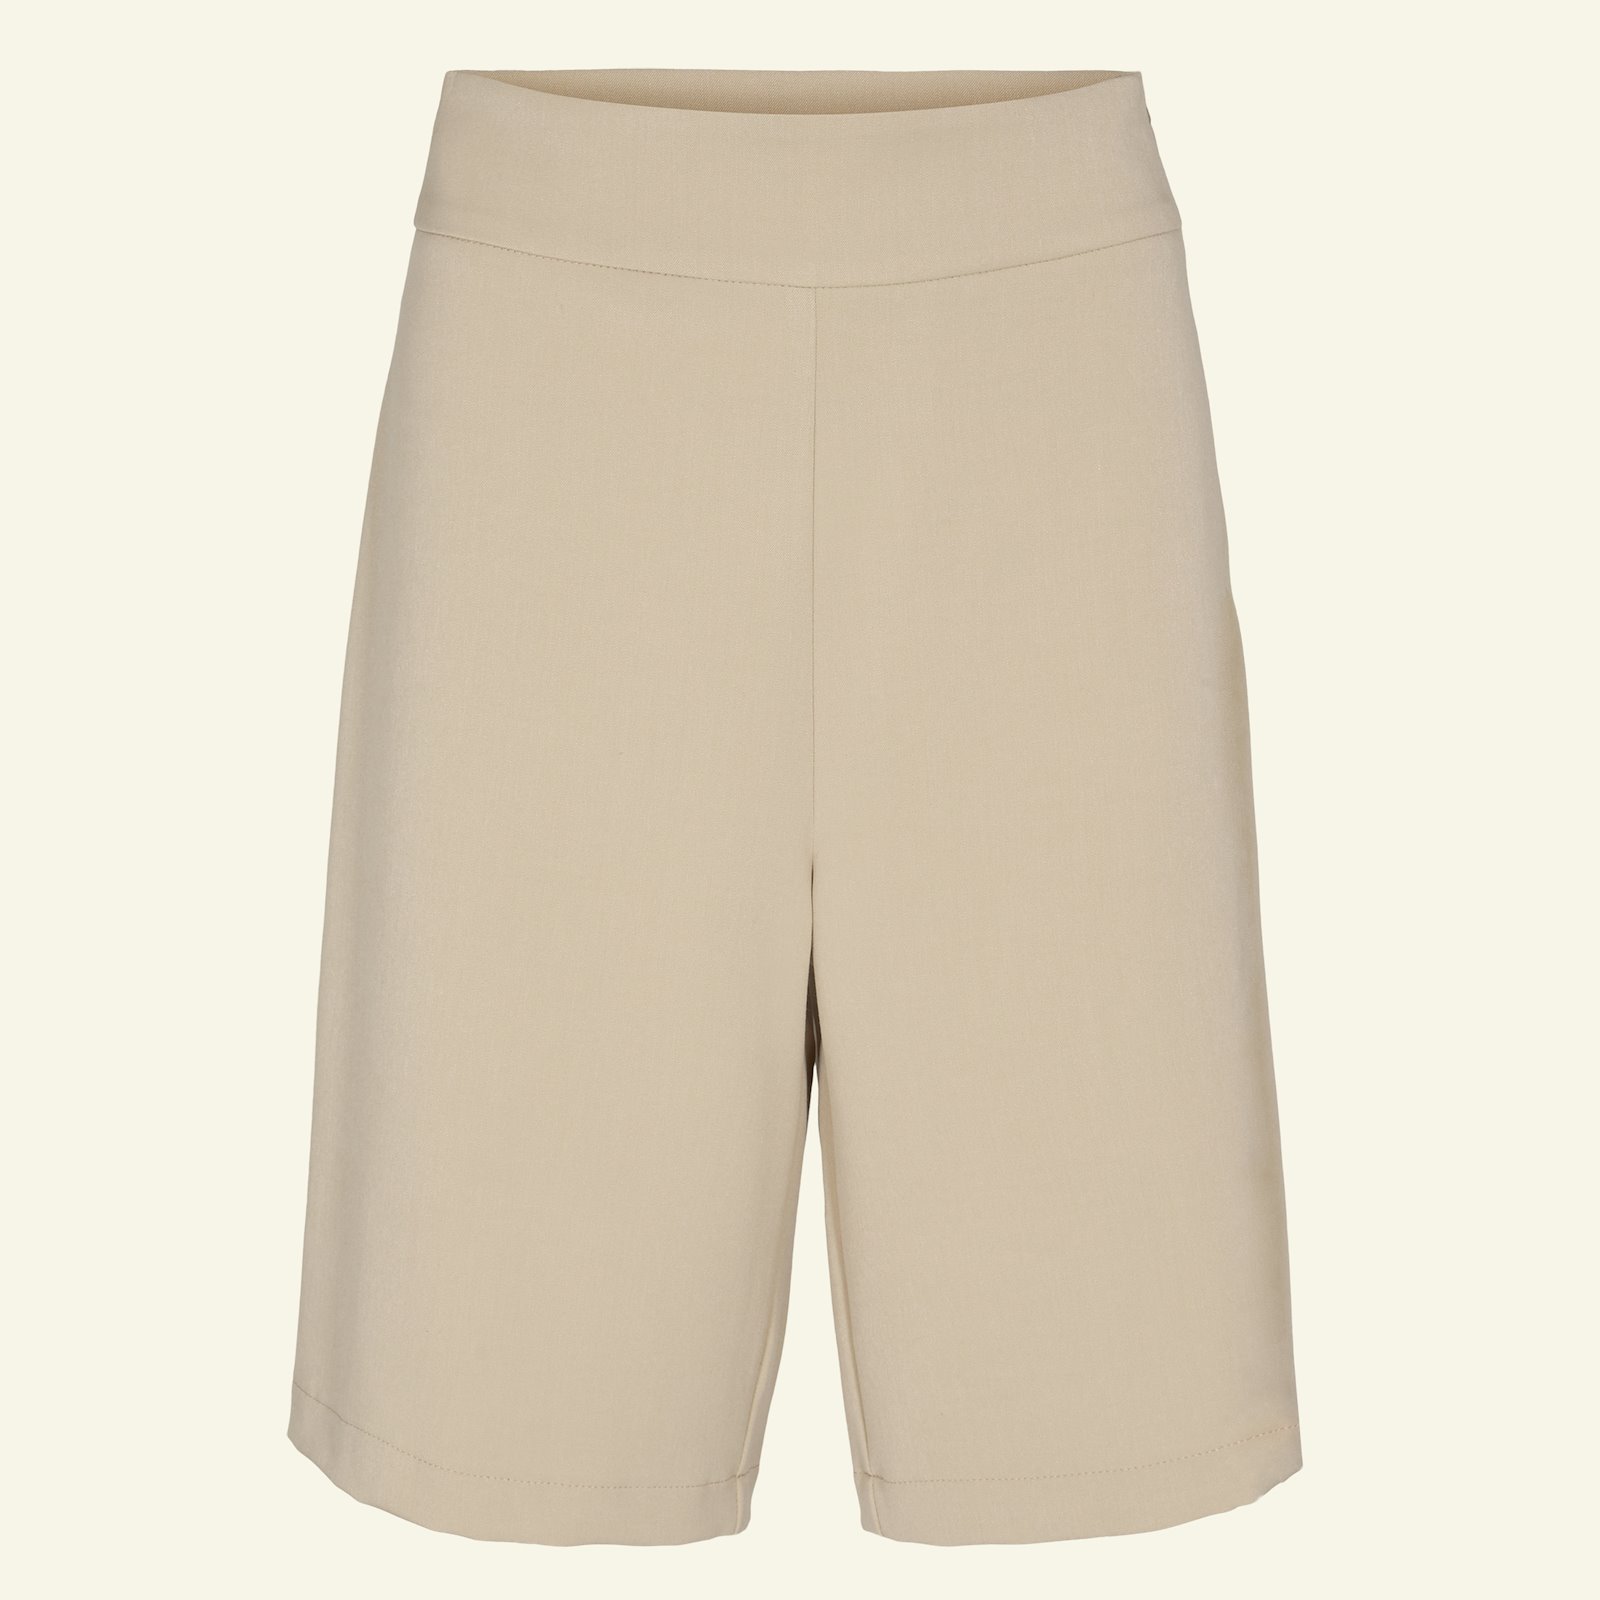 Highwaist and wide legs trousers, 44/16 p20052_460857_sskit